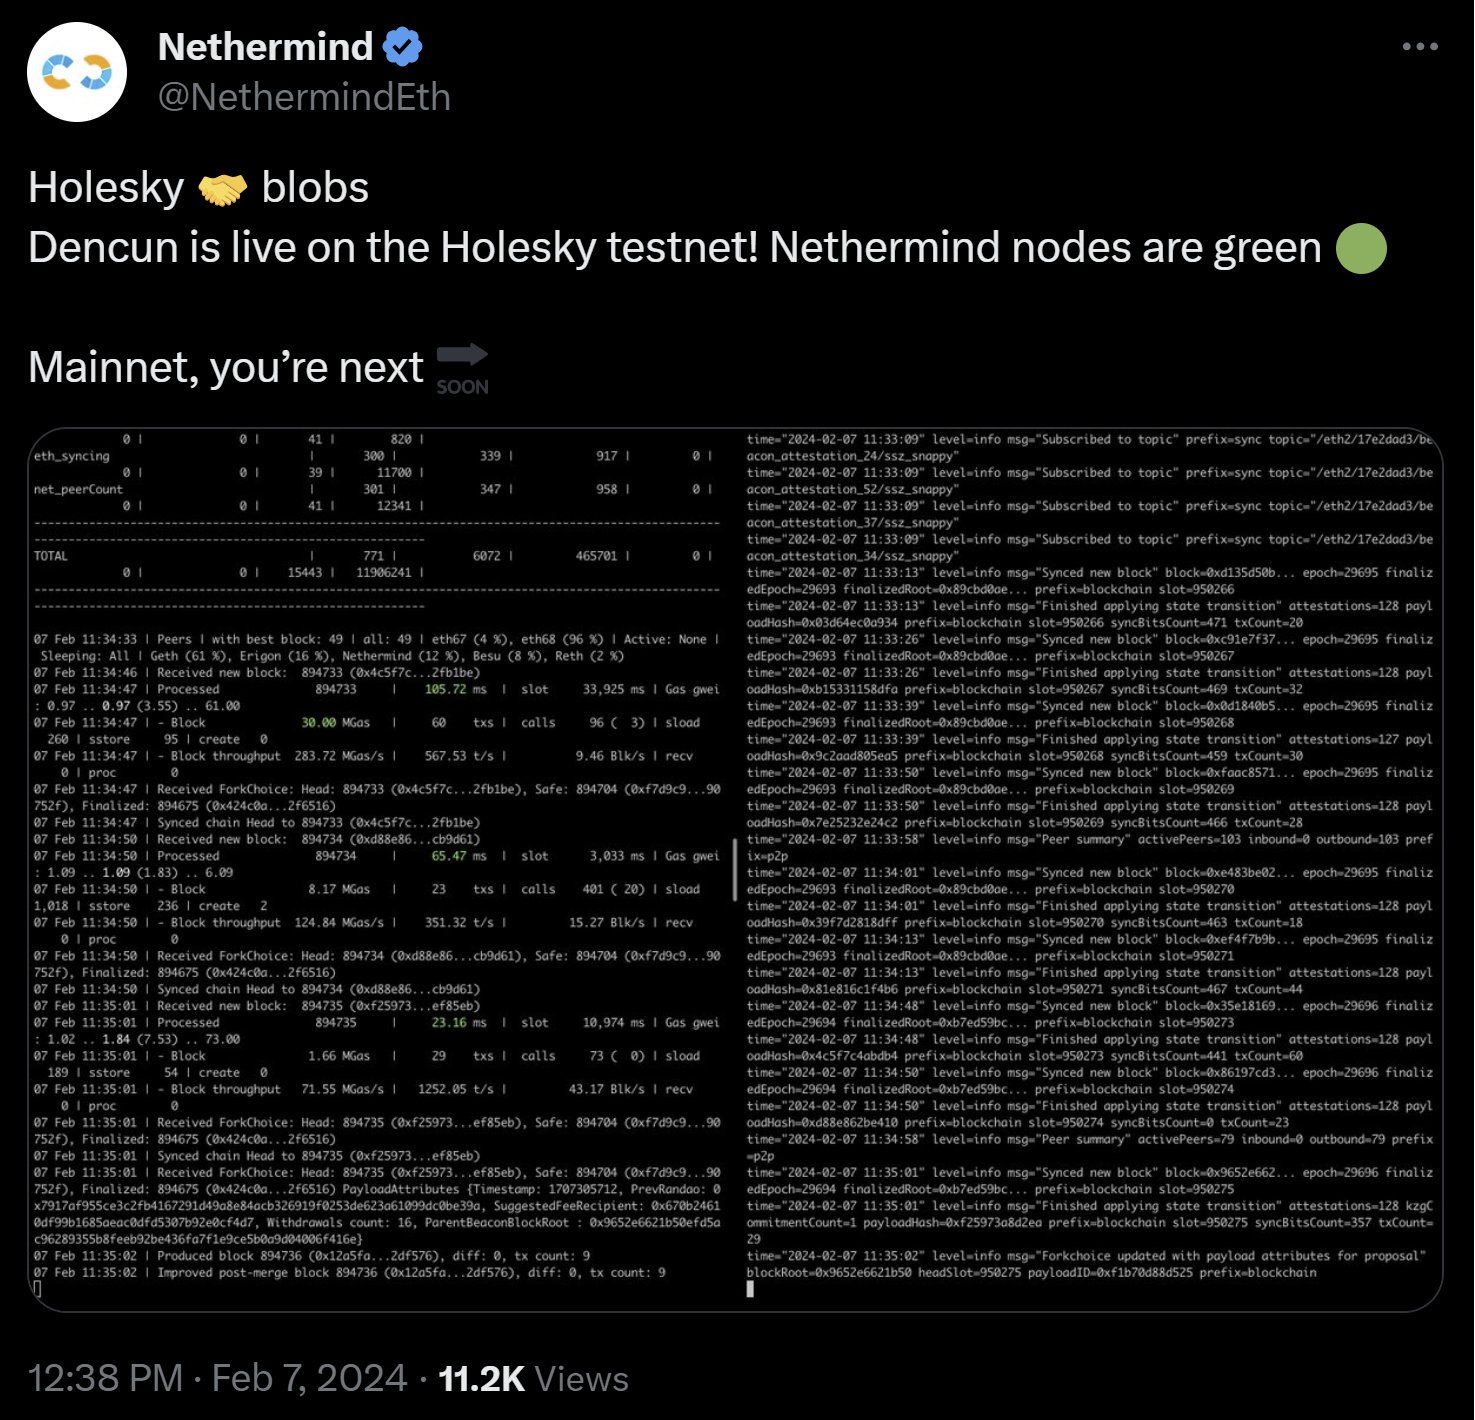 NethermindEth X Post Confirming Dencun is live on the Holesky testnet